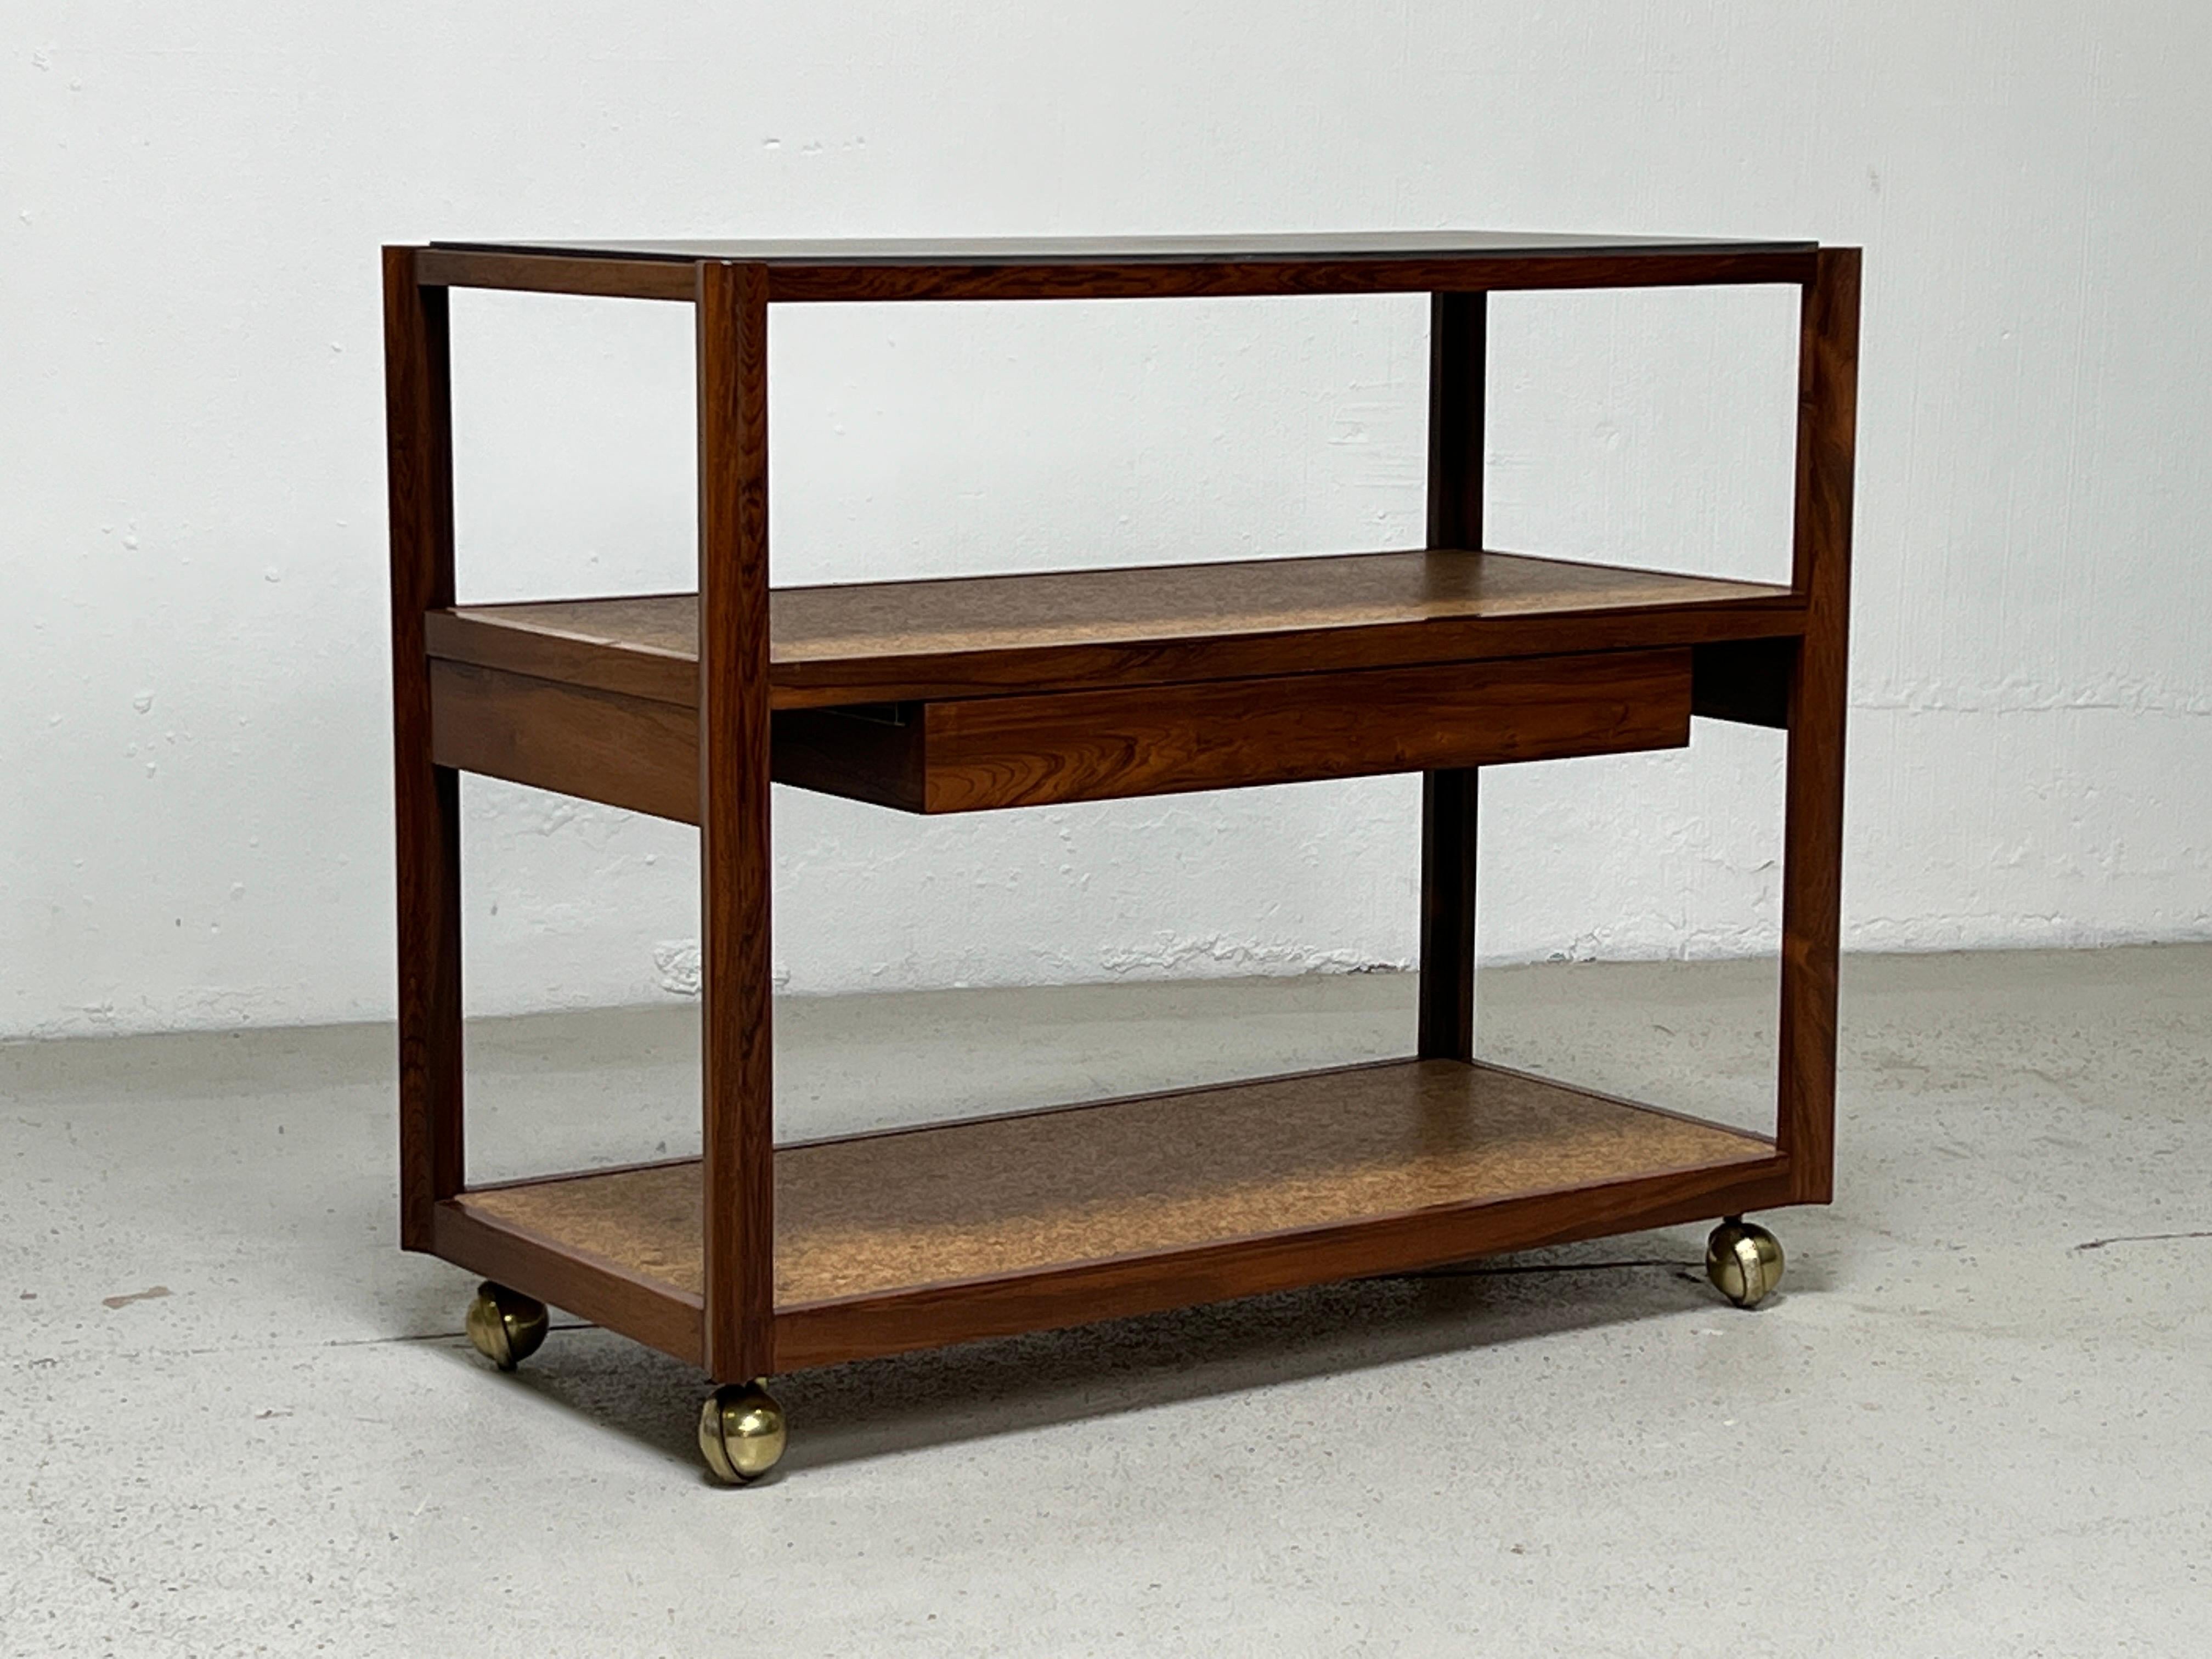 A sculpted rosewood bar cart with single drawer, cork shelves and slate top. Designed by Edward Wormley for Dunbar.